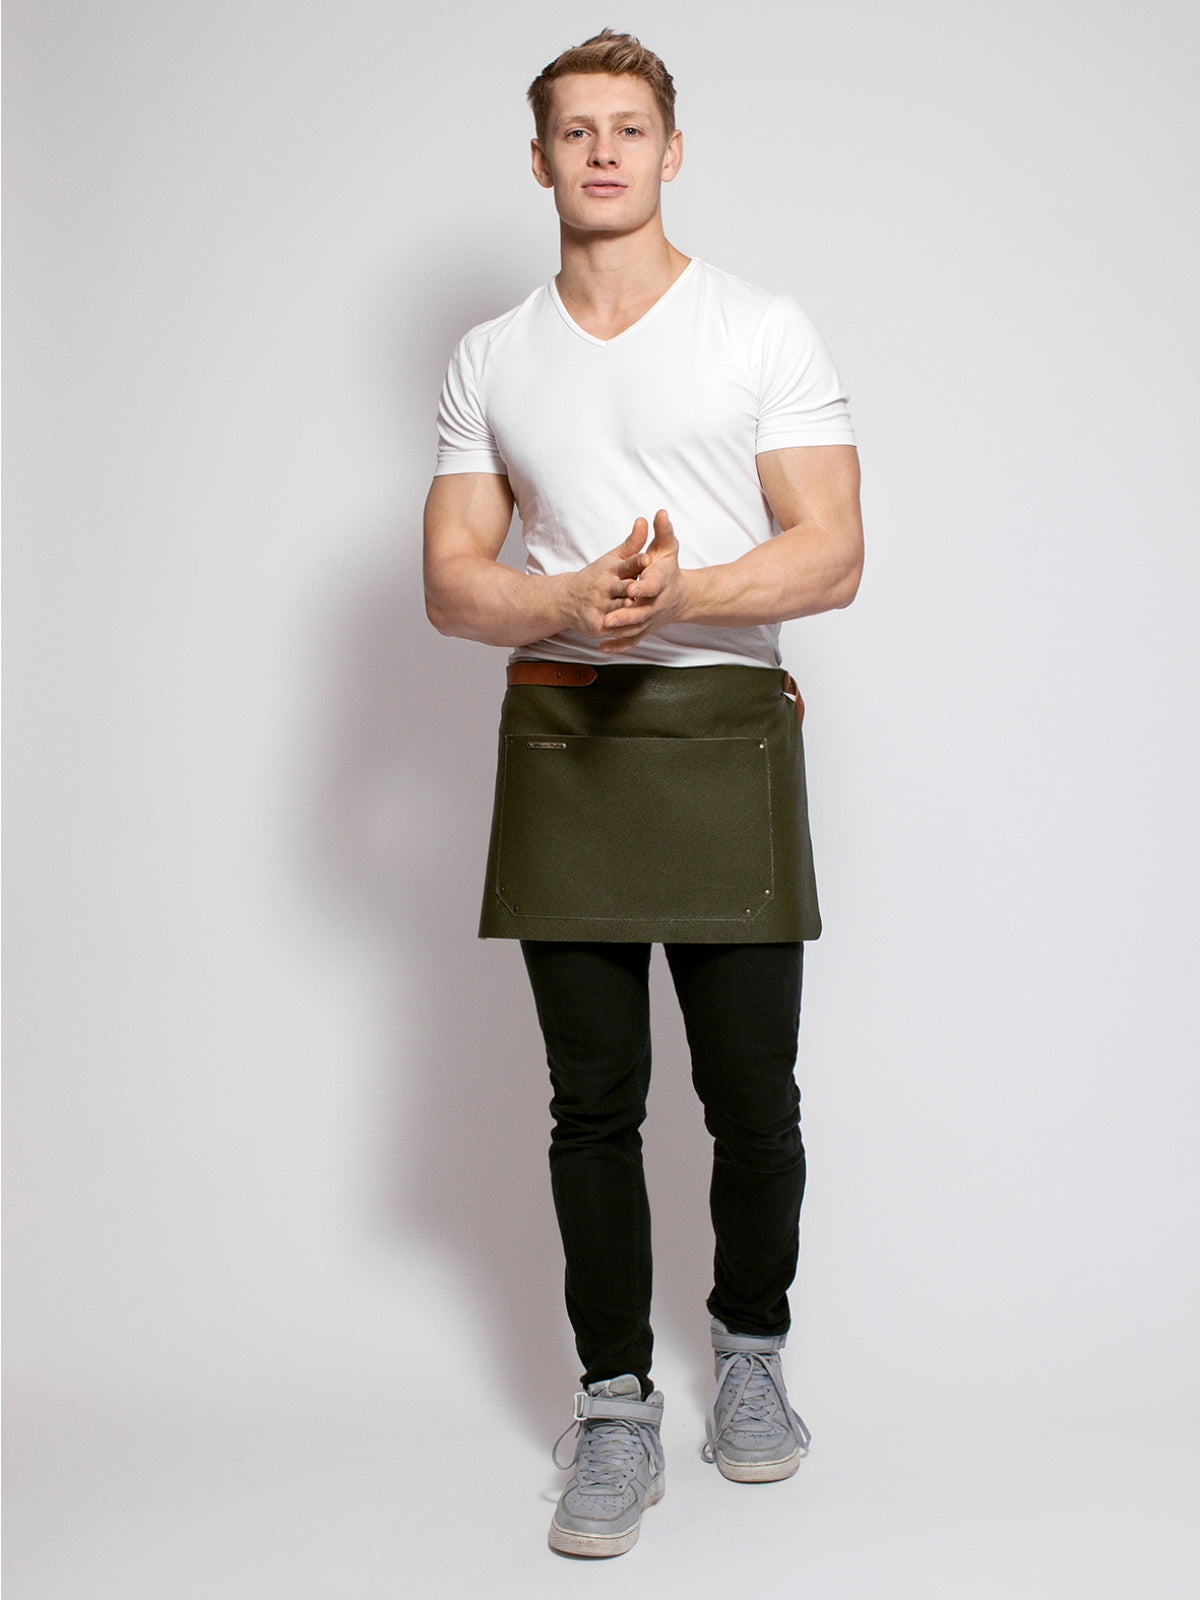 Leather Waist Apron Deluxe Green by STW -  ChefsCotton